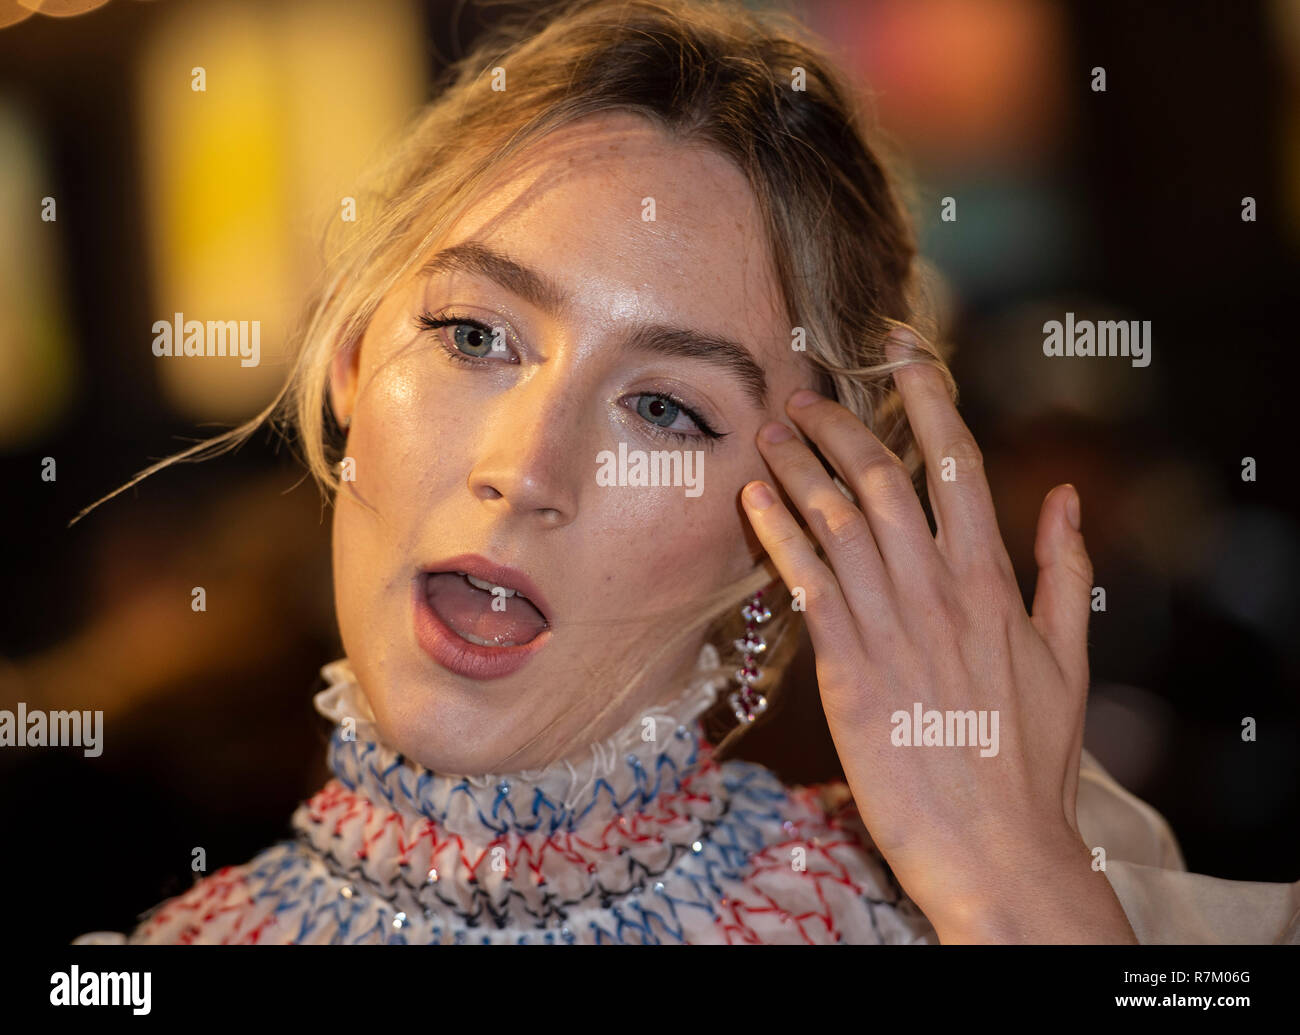 London, UK. 10th Dec 2018. Saoirse Ronan attends the European Premiere of 'Mary Queen Of Scots' at Cineworld Leicester Square on December 10, 2018 in London, England. Credit: Gary Mitchell, GMP Media/Alamy Live News Stock Photo